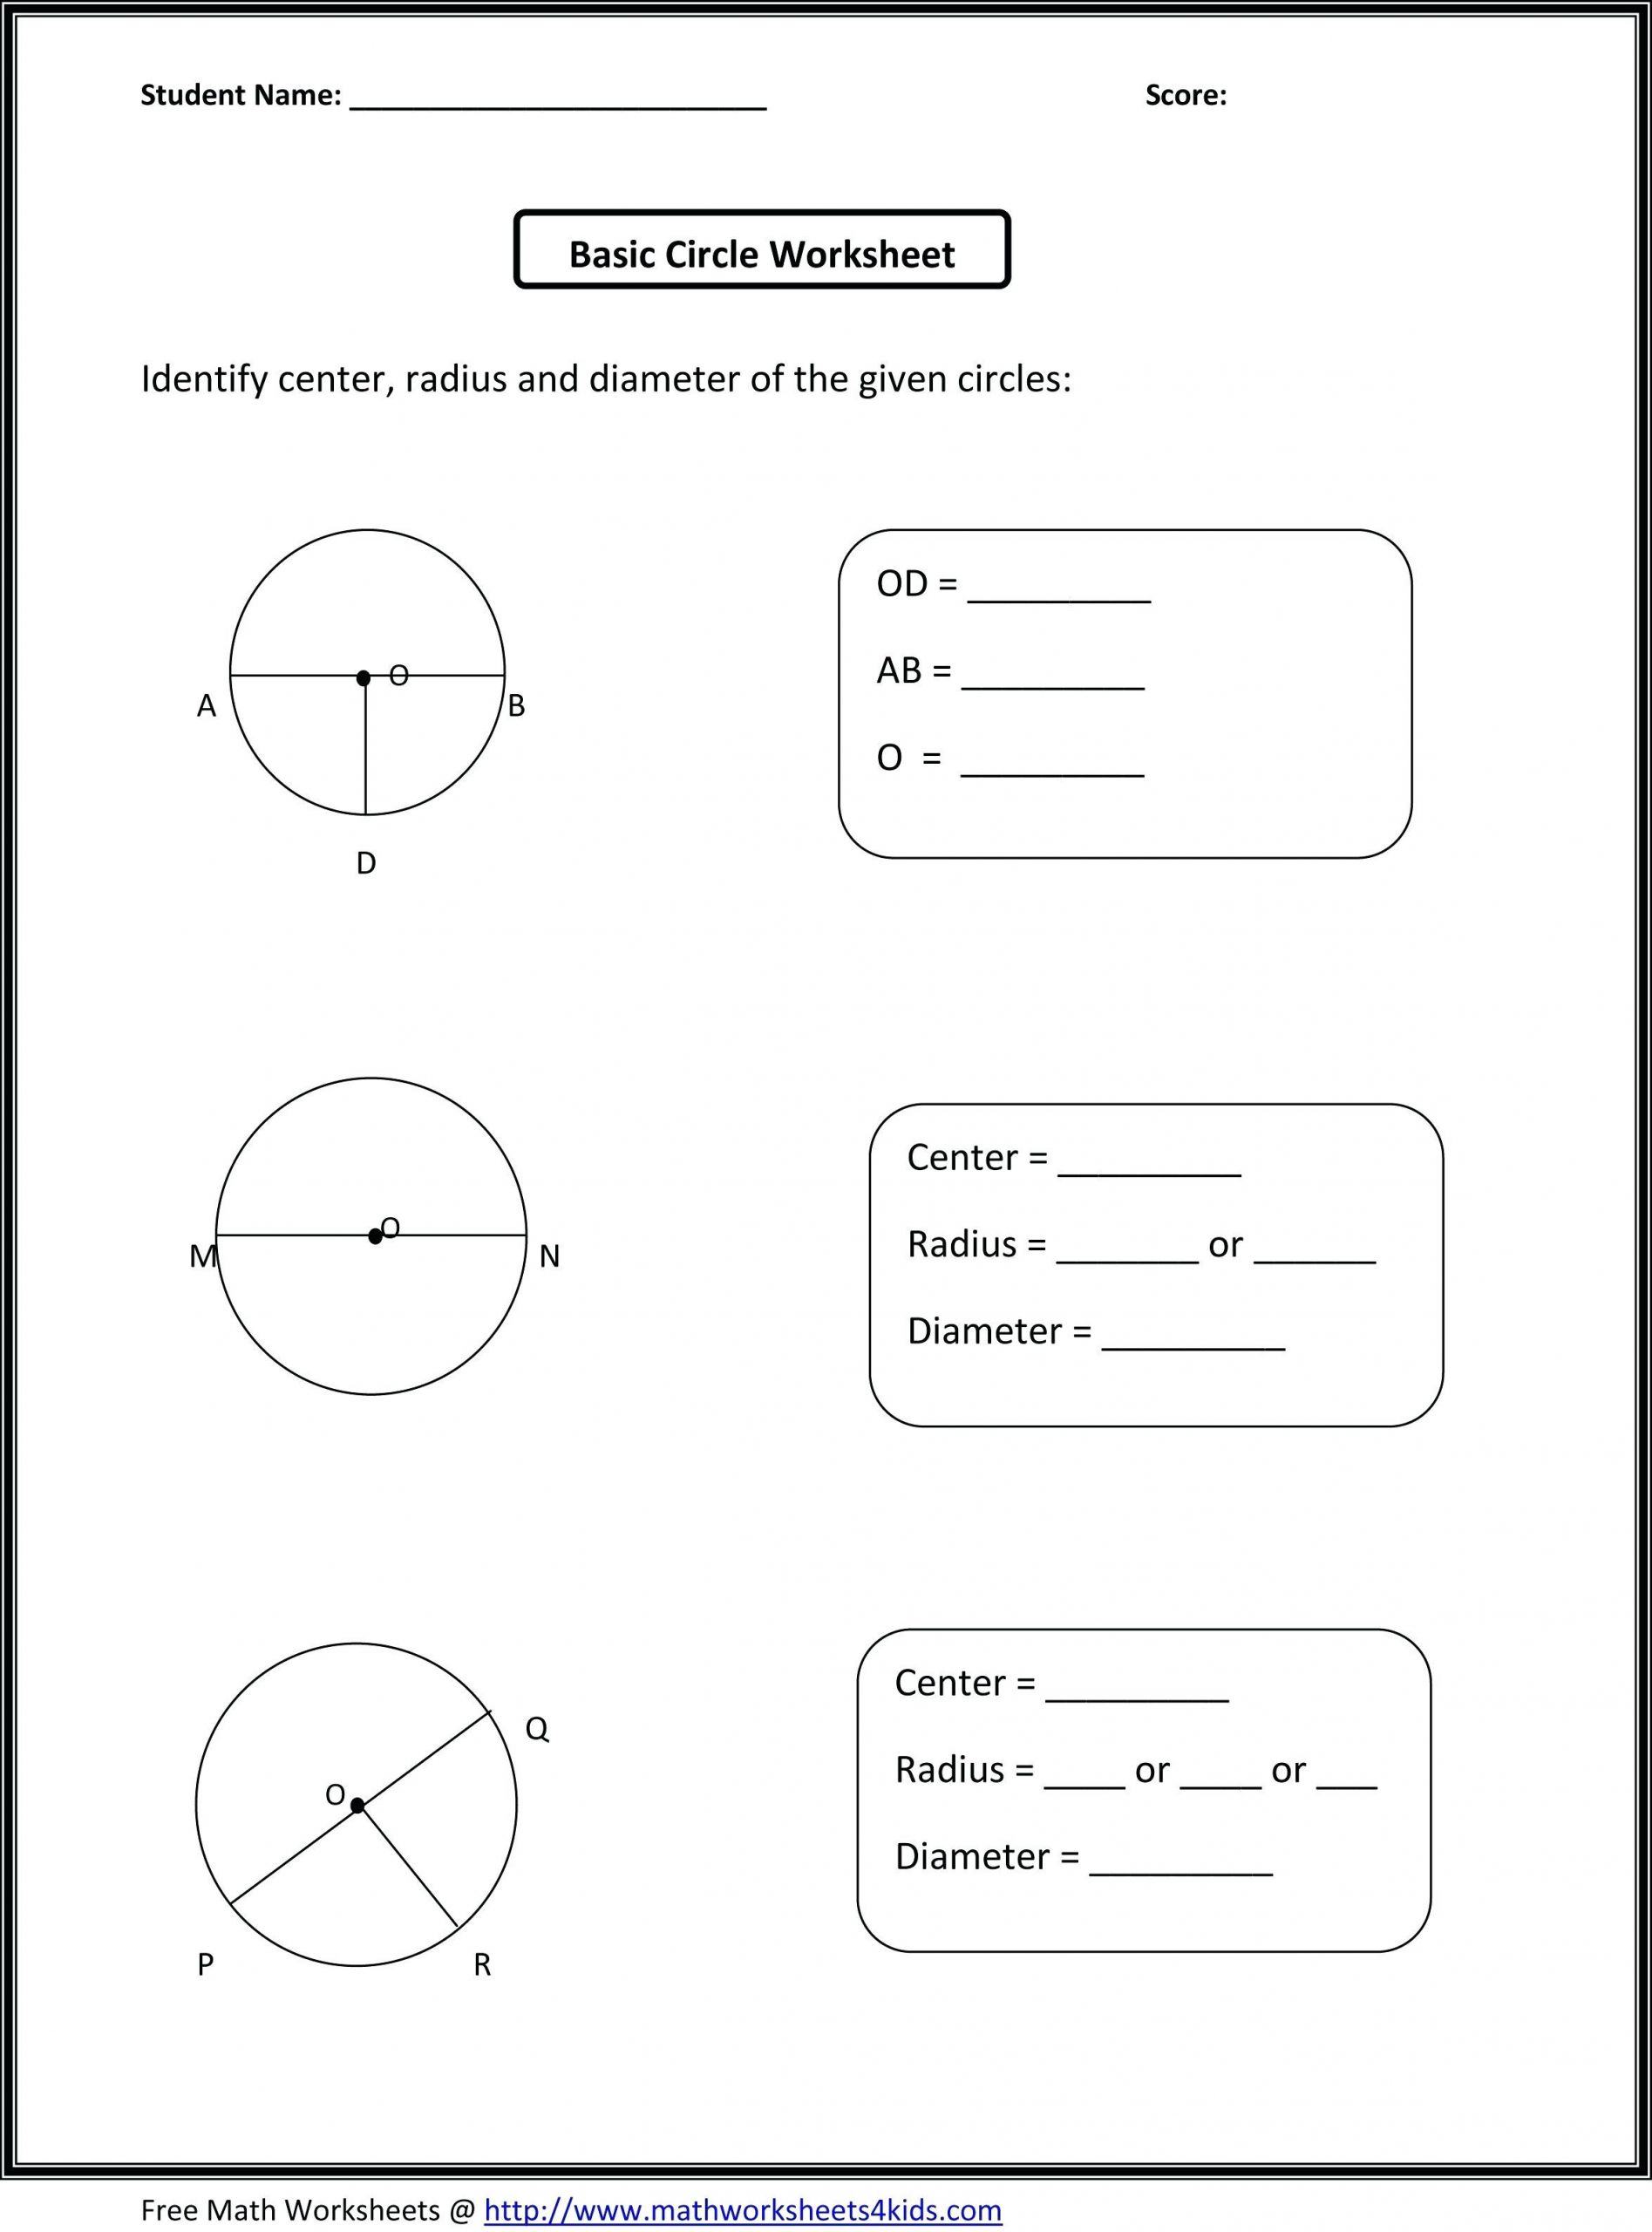 4th grade reading practice step multiplication word problems year 2nd mon core worksheets writing sheets for numeracy skills math addition and subtraction language worksheet on fifth